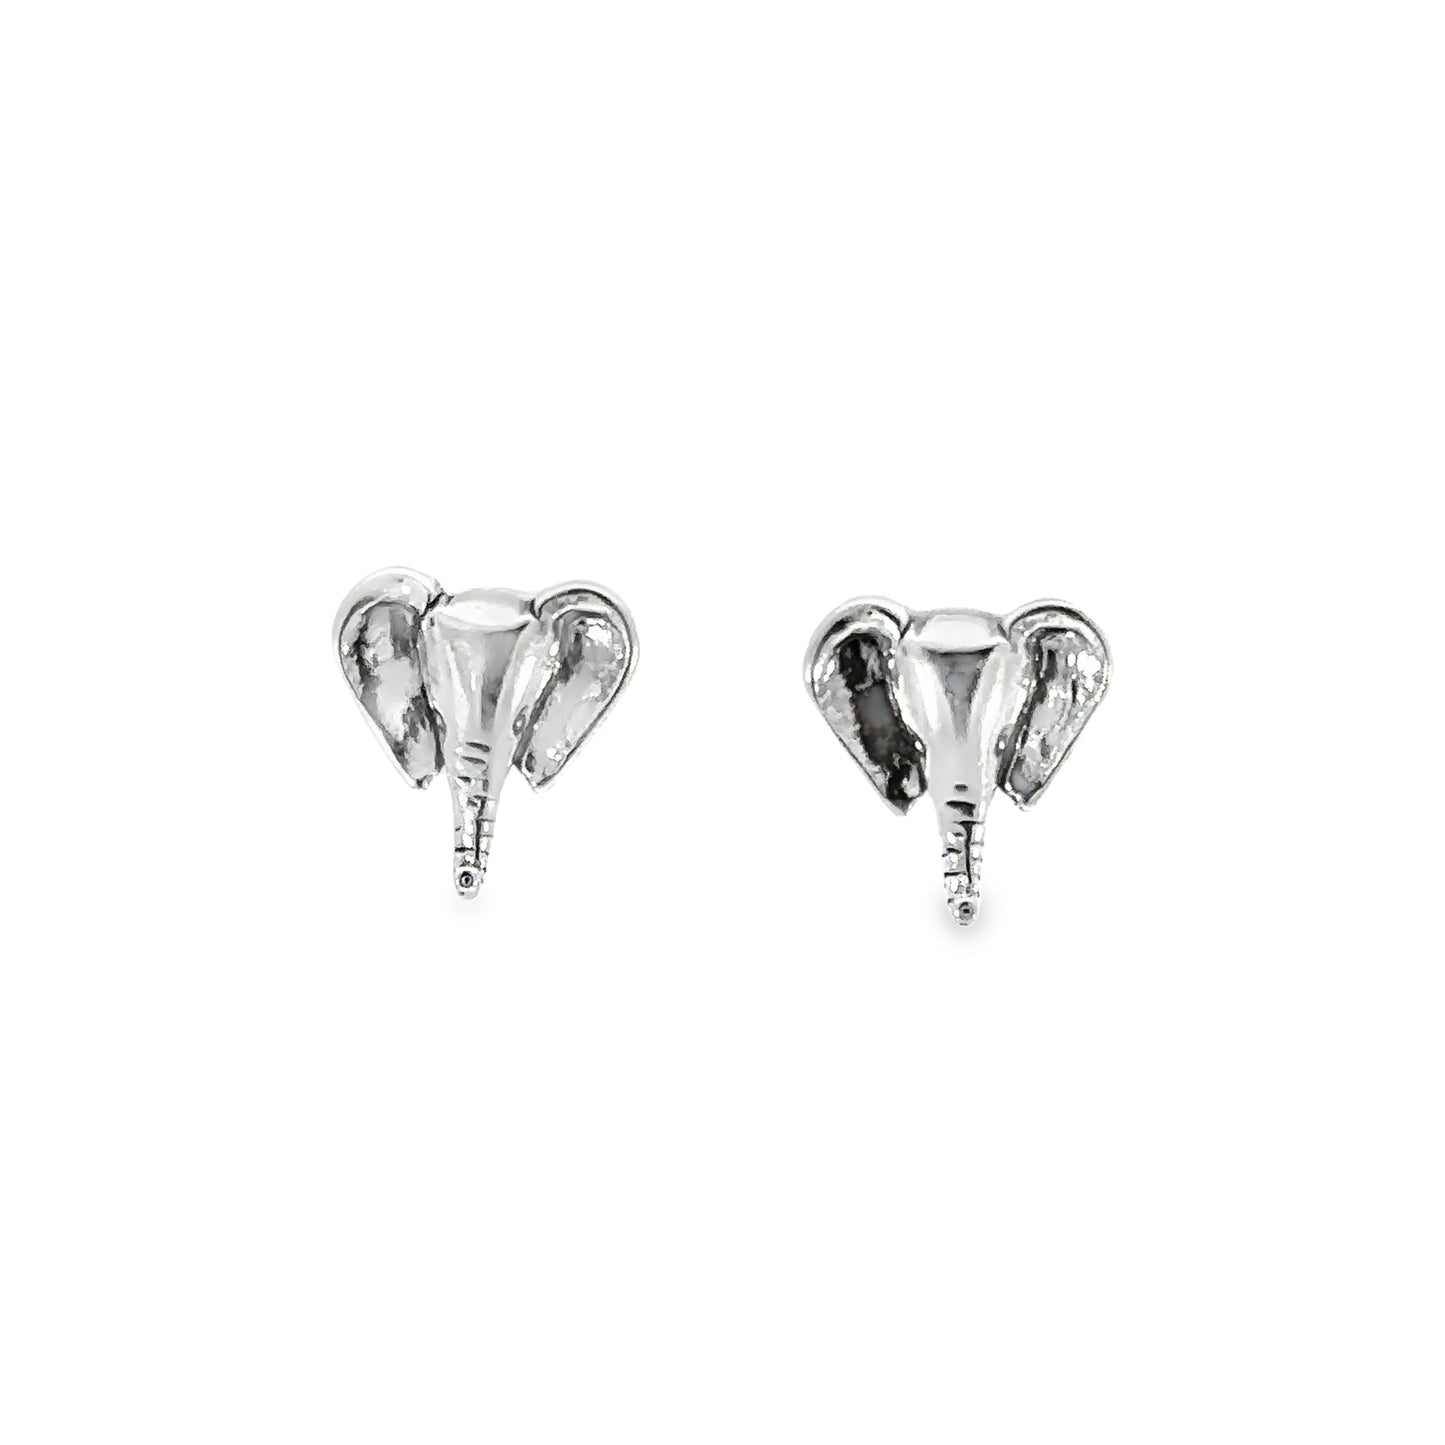 A pair of adorable silver Elephant Head Studs on a white background, perfect for animal lovers.